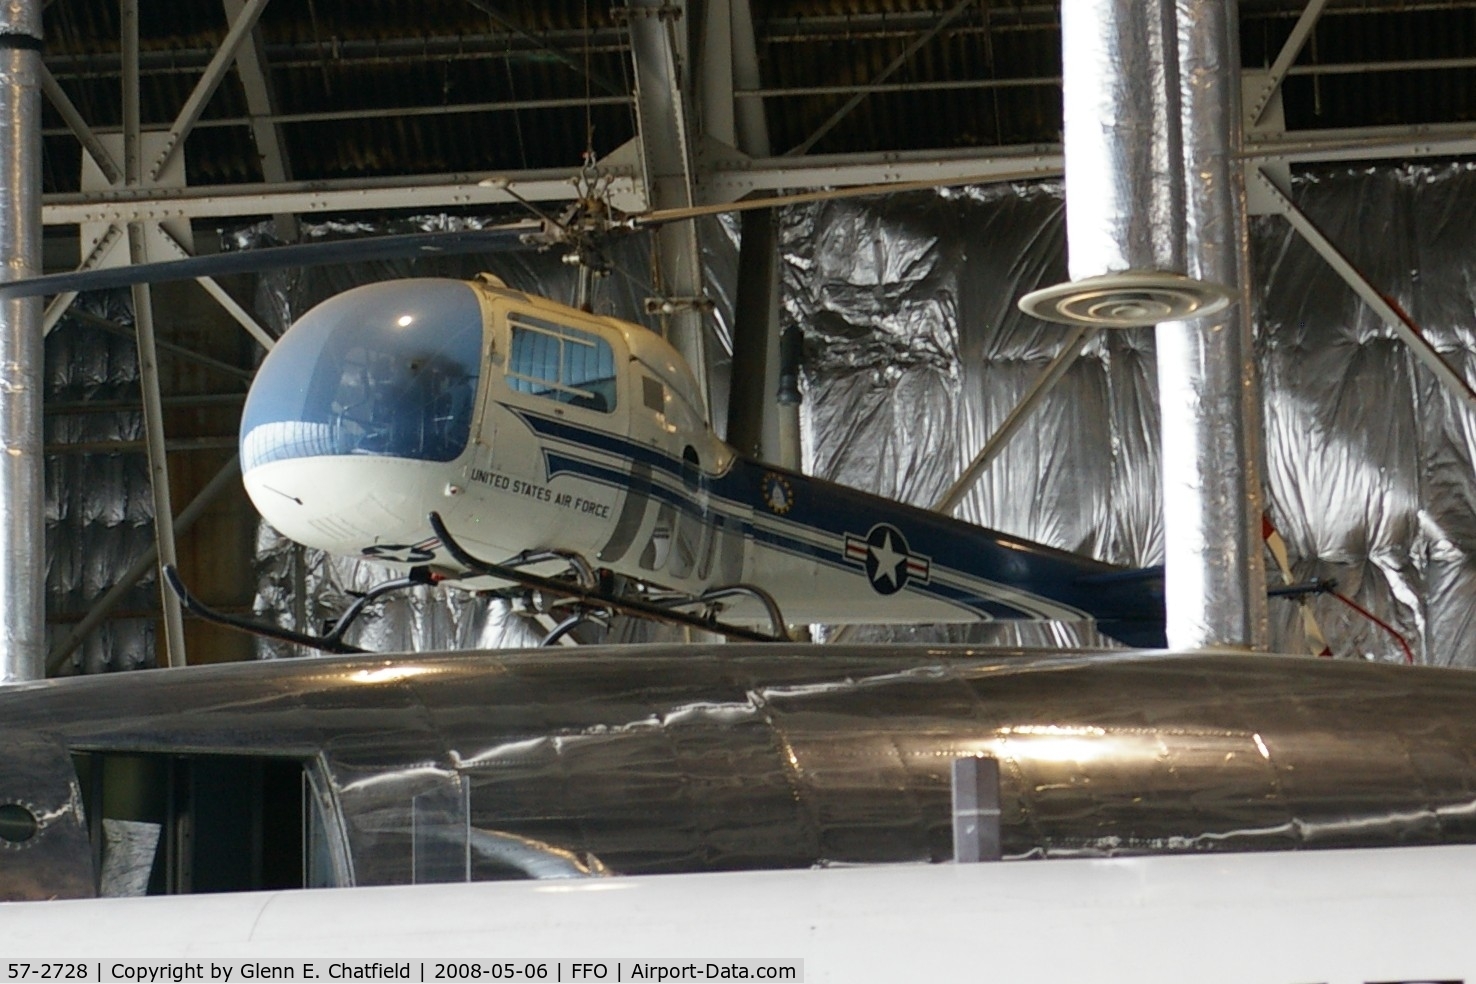 57-2728, 1957 Bell UH-13J Sioux C/N 1575, Displayed at the National Museum of the U.S. Air Force